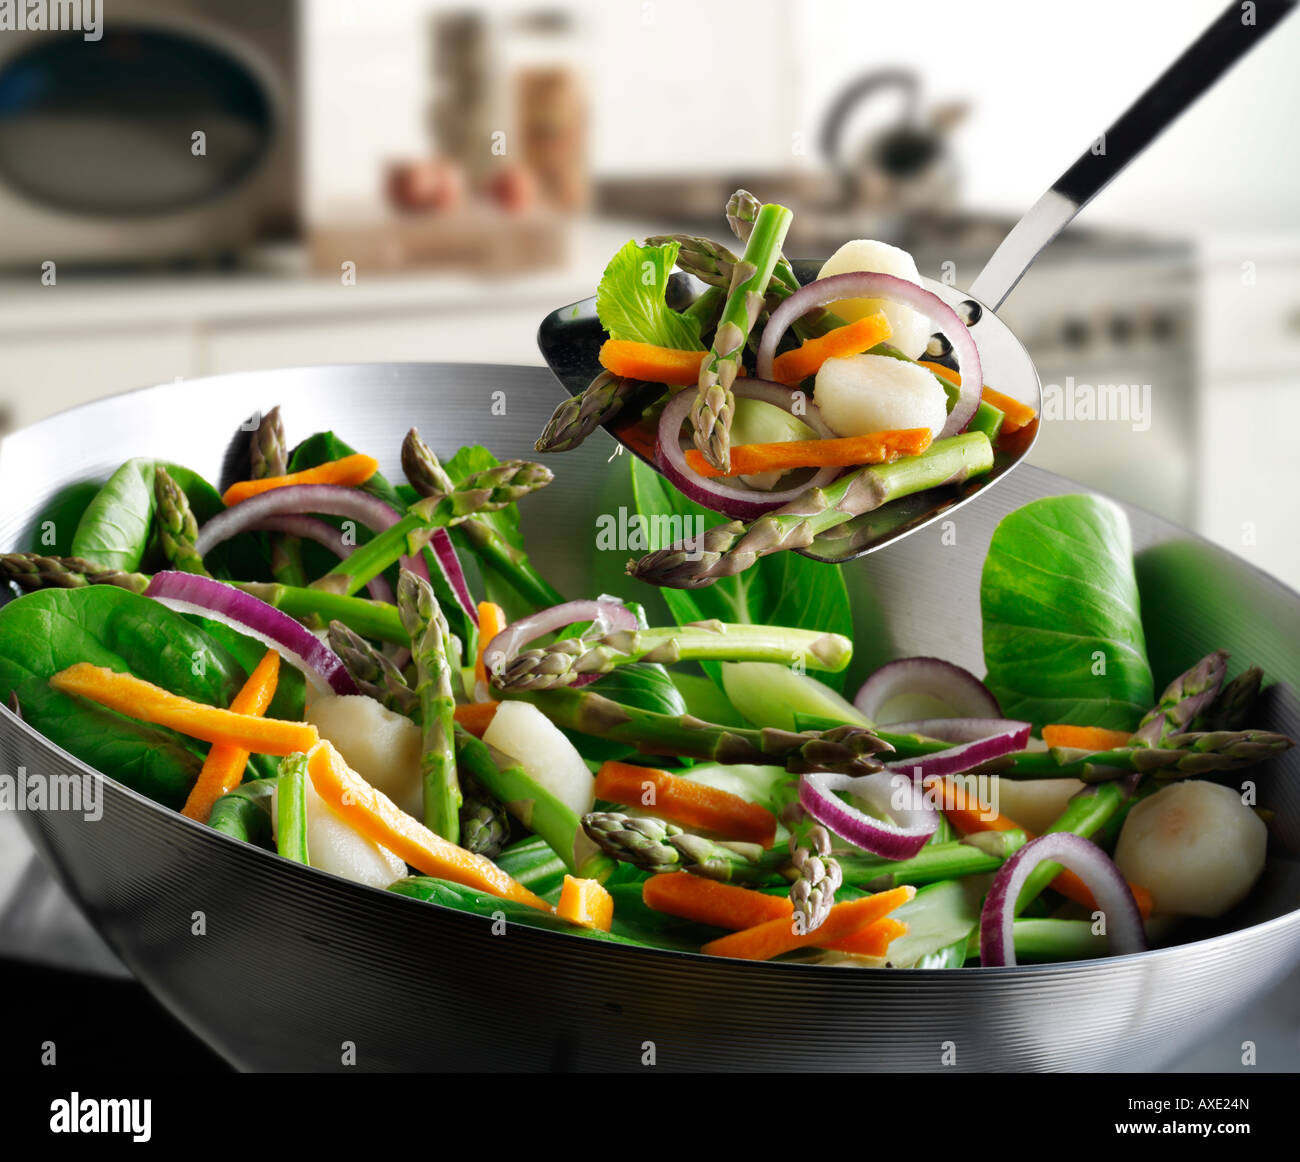 Vegetable stir fry in a wok being stirred with asparagus, red onions, bean shoots, pak choi and vegetables Stock Photo